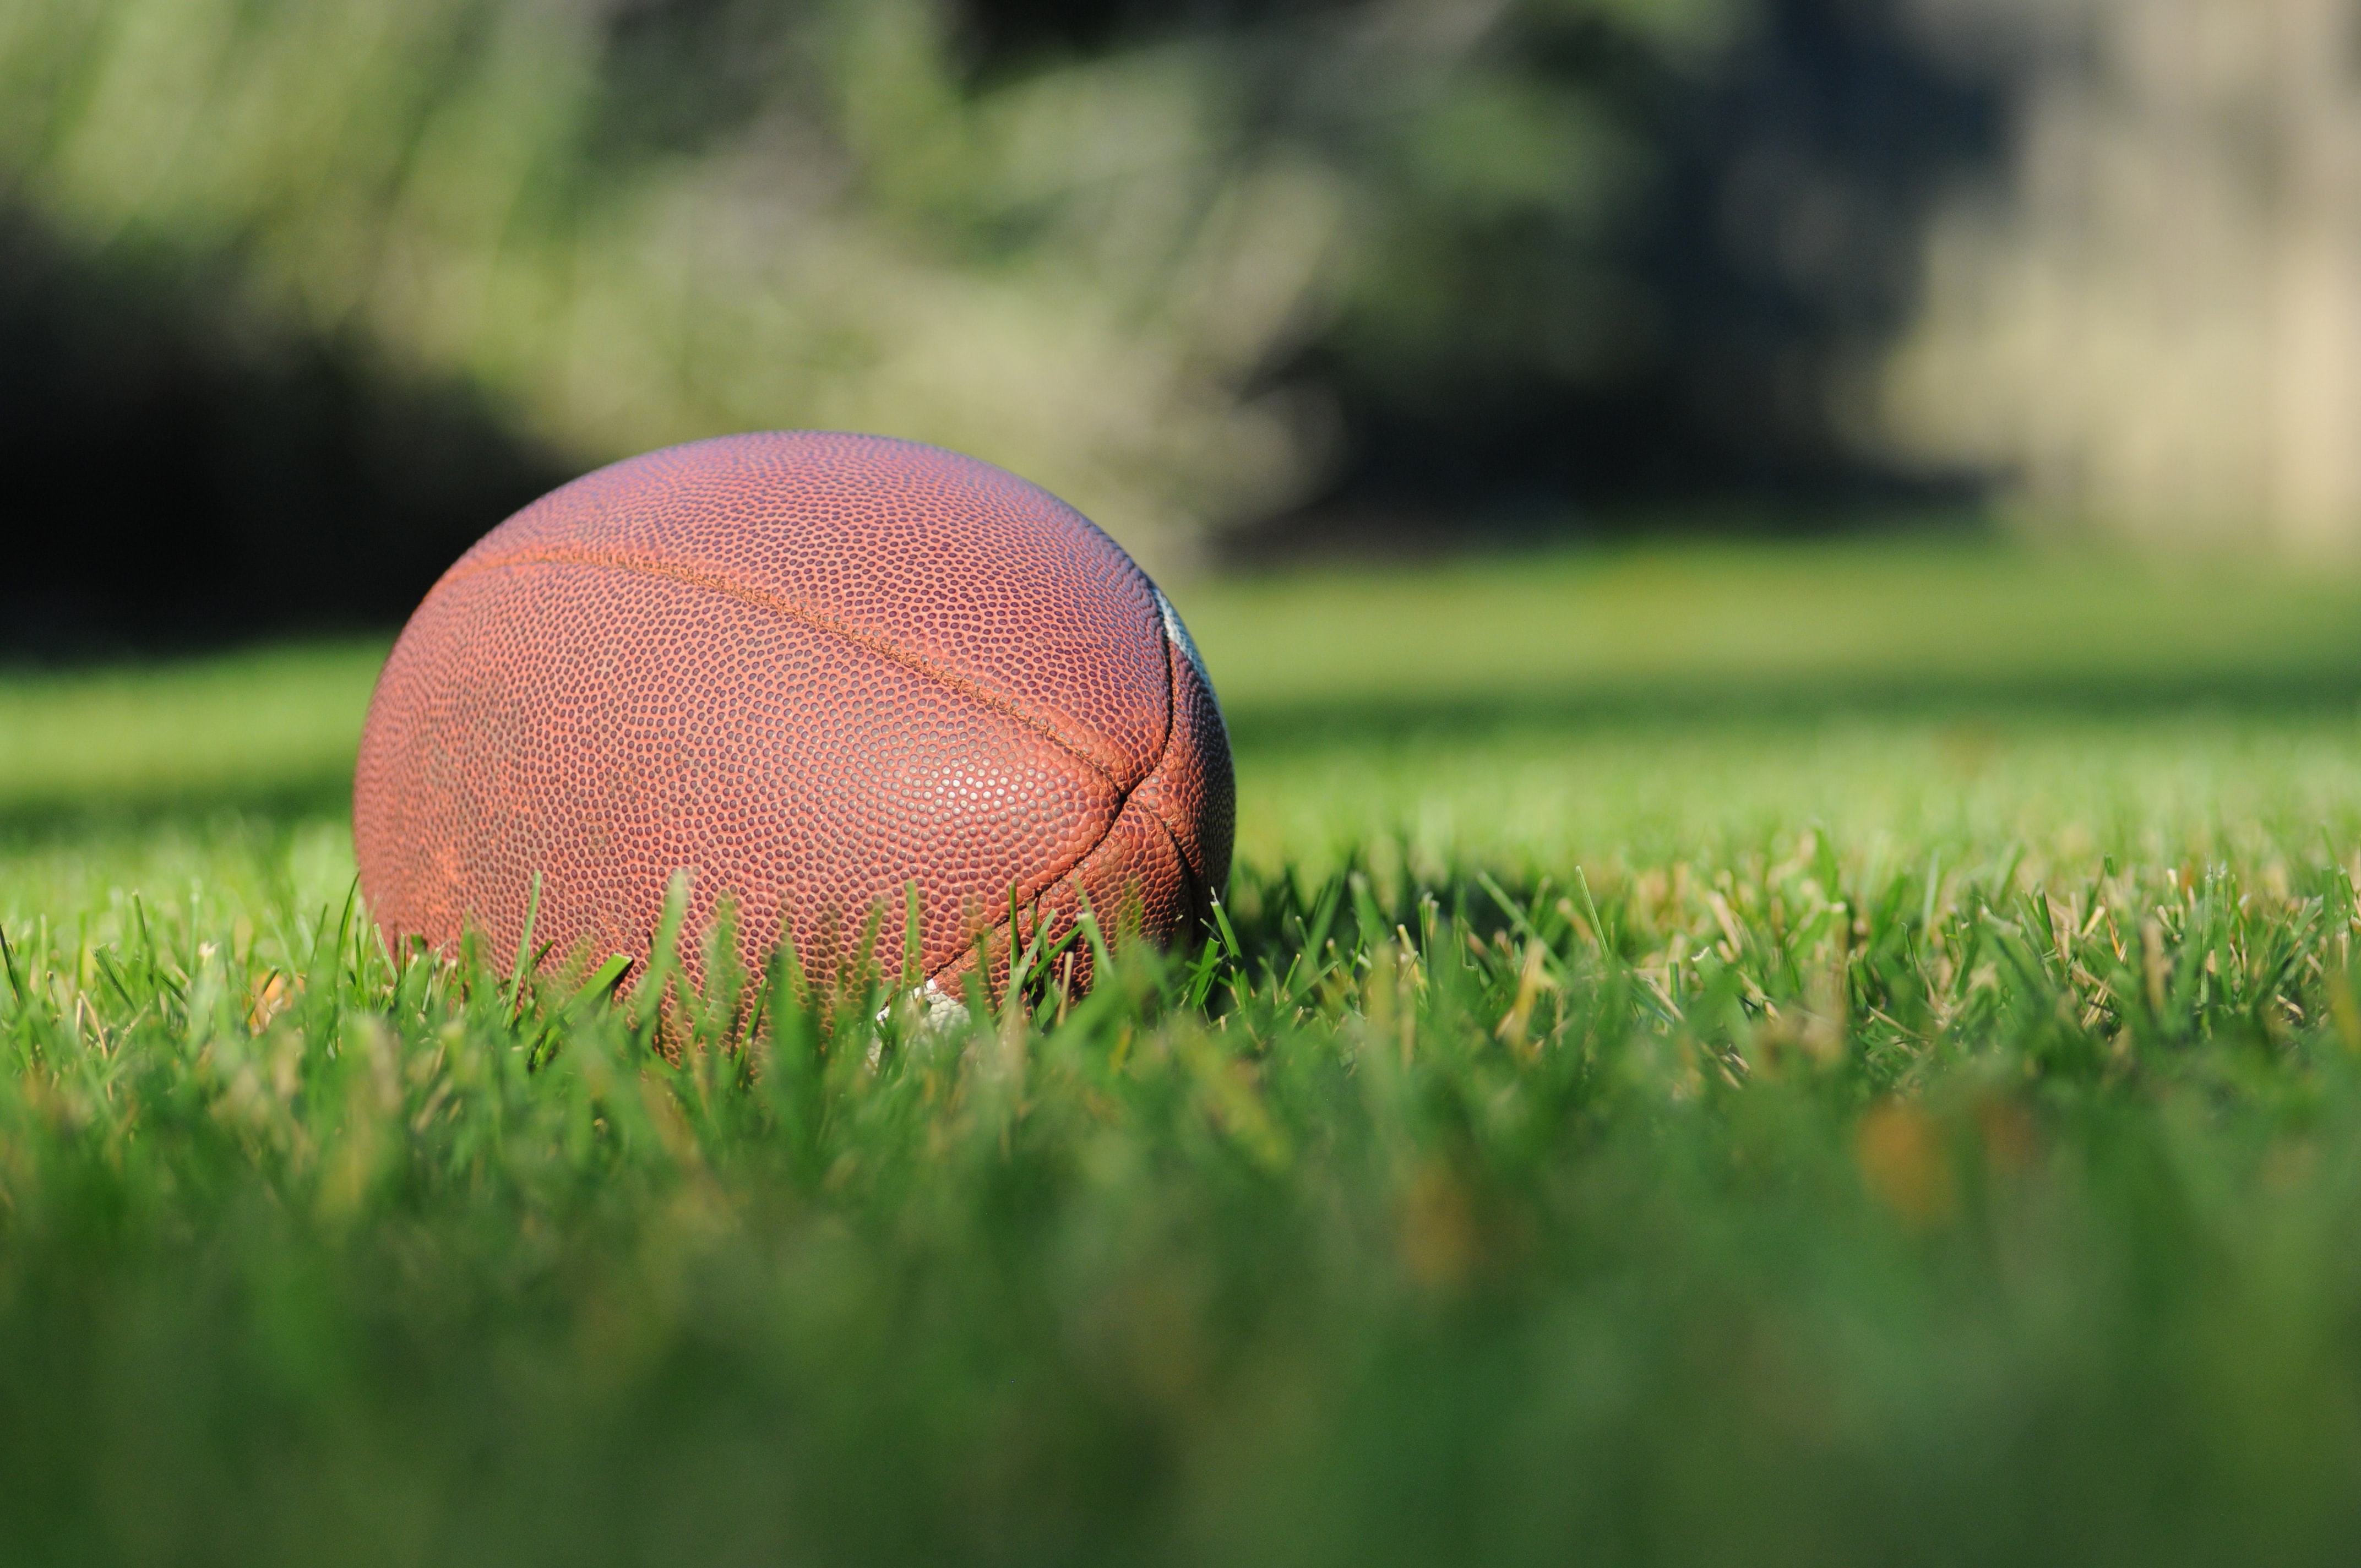 American football laying on green grass